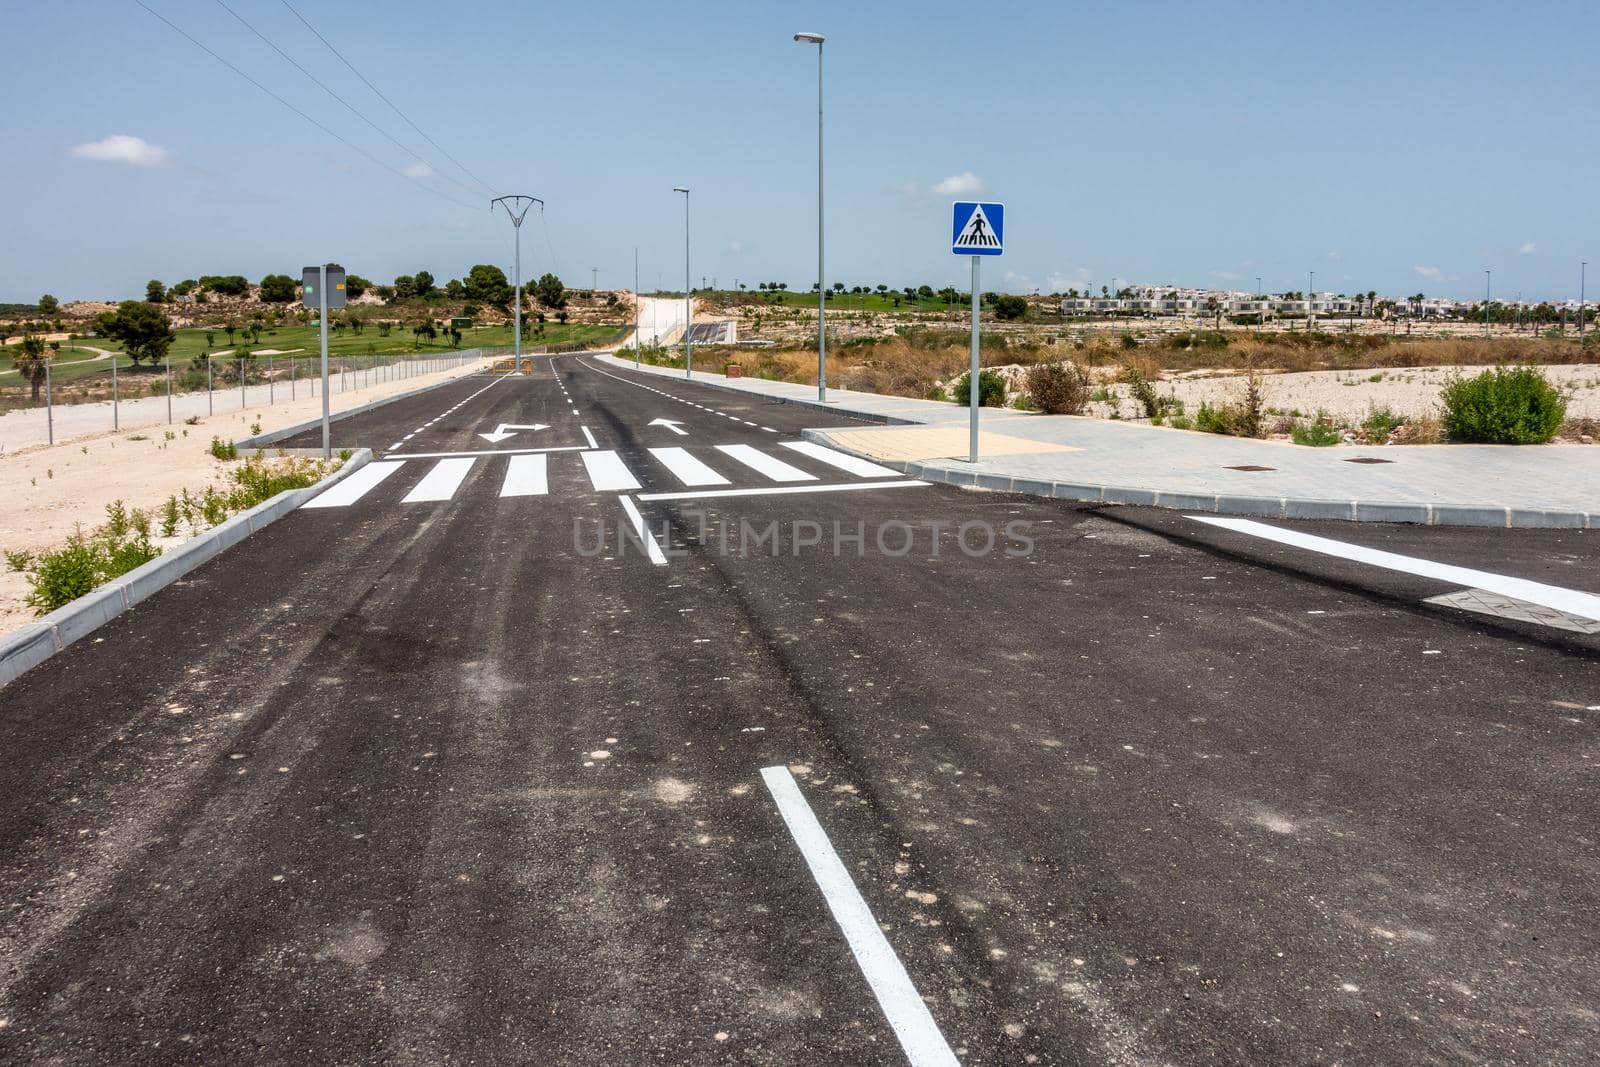 new road markings and road signs on freshly tarmacked roads on spanish urbanisation